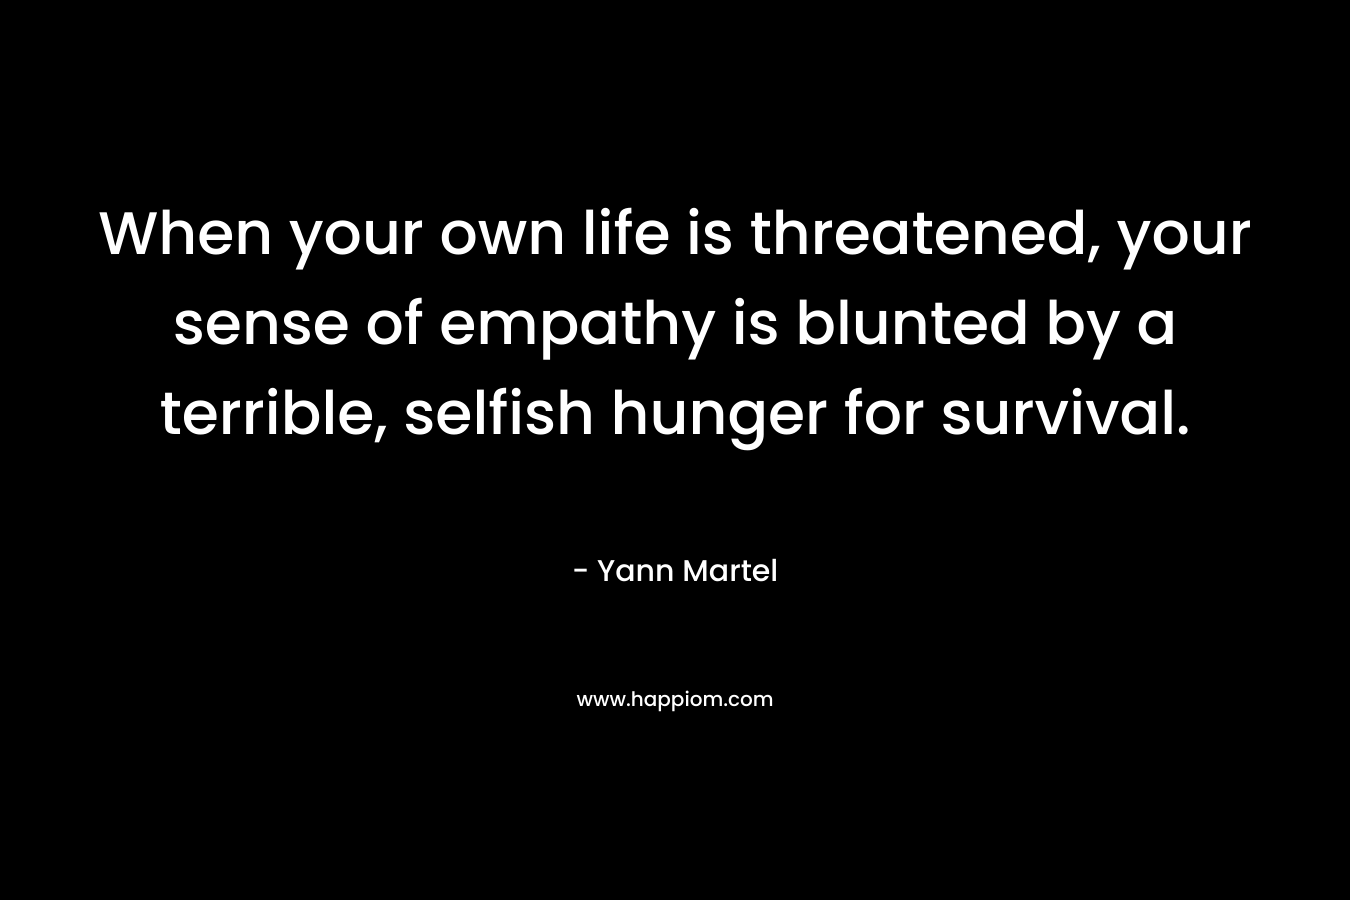 When your own life is threatened, your sense of empathy is blunted by a terrible, selfish hunger for survival. – Yann Martel